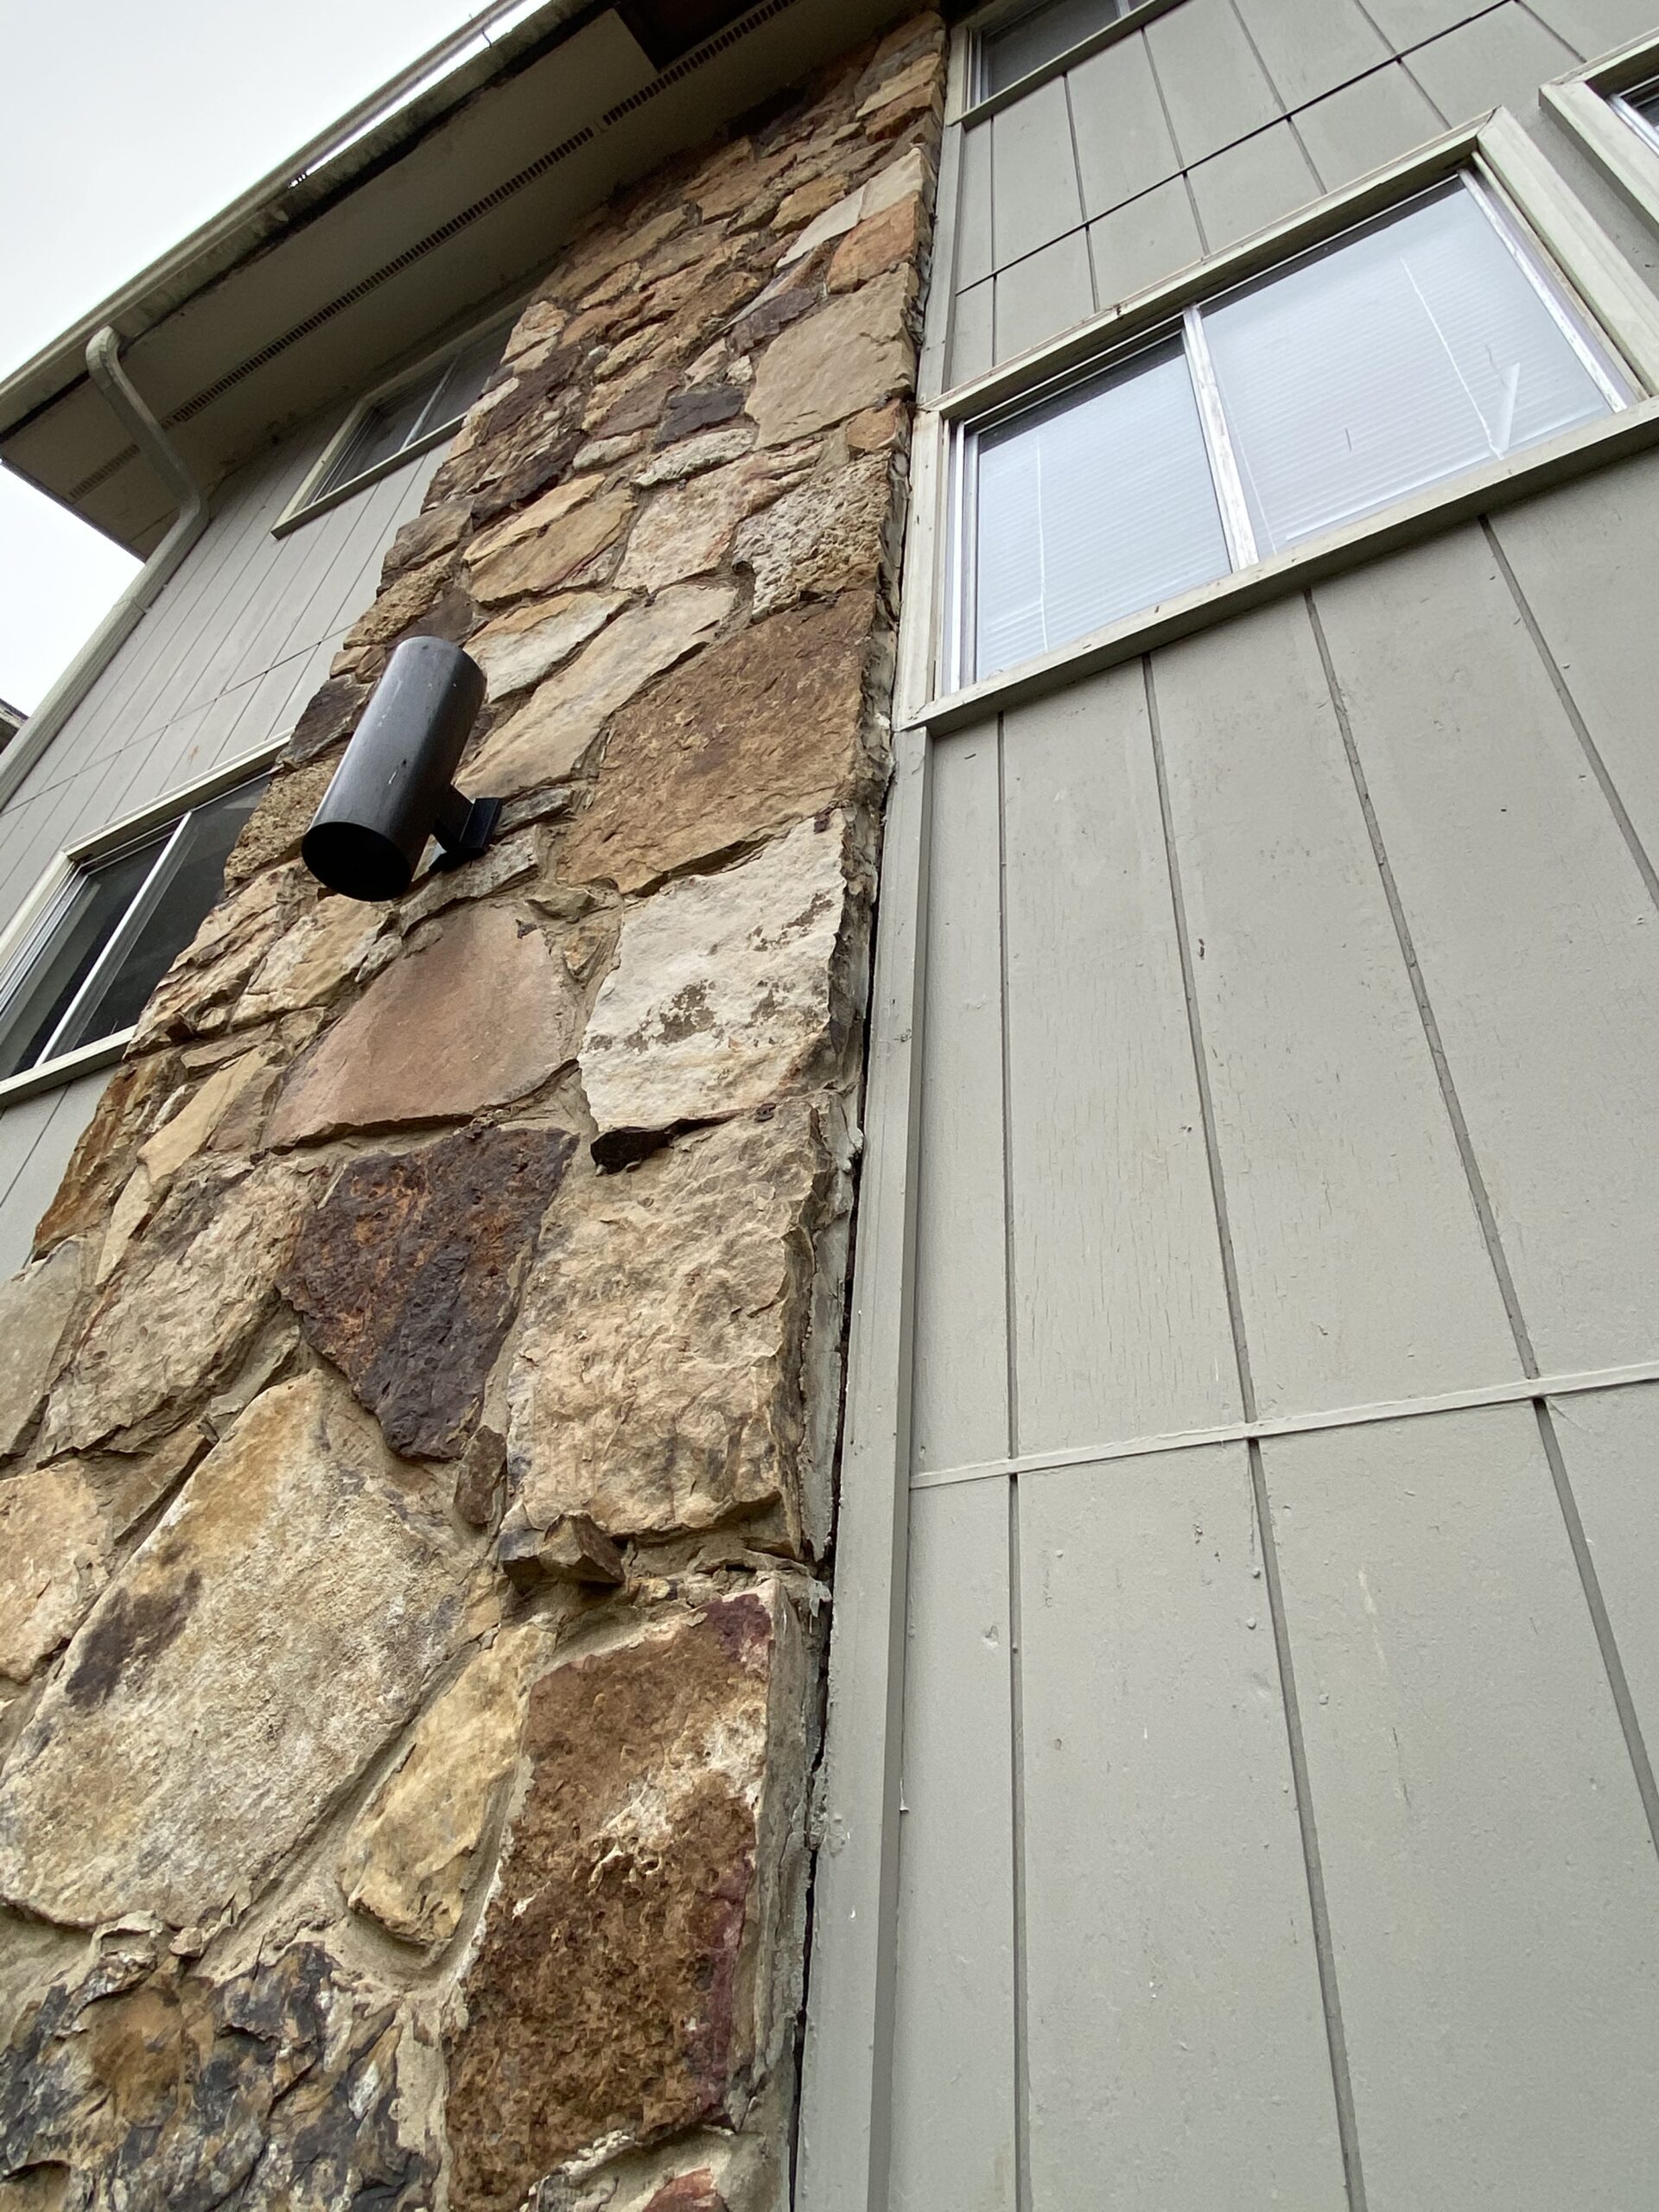 This is a picture of Stackstone siding next to T1 11 siding on a mark apartment complex in Knoxville Tennessee